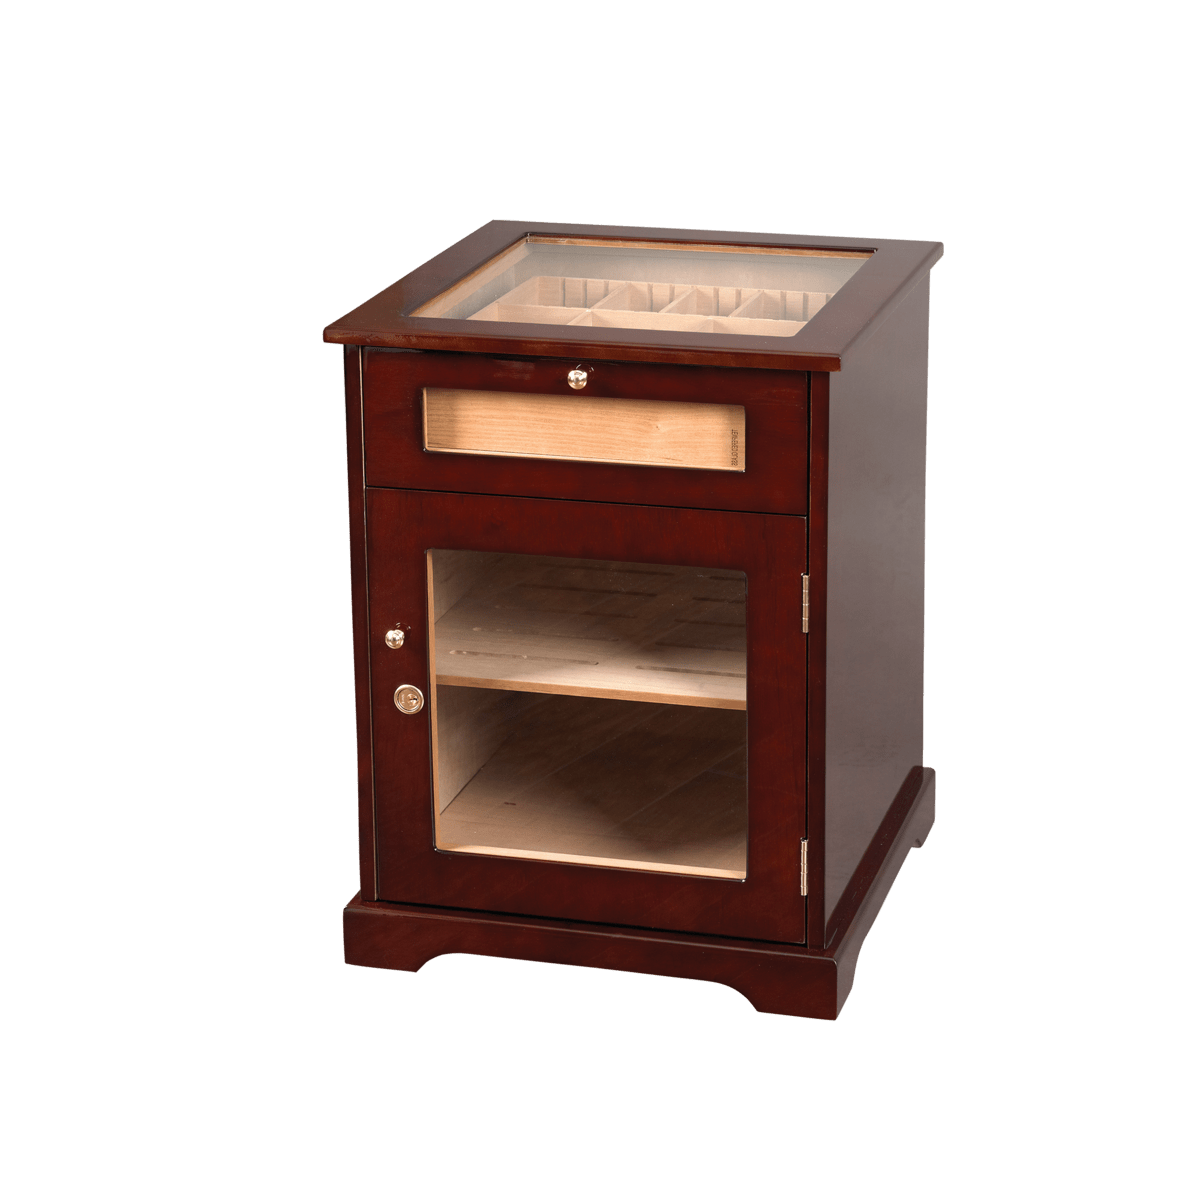 Galleria End Table Small Cigar Humidor Cabinet | Holds 600 Cigars HUM-600G Cigar Humidors HUM-600G Luxury Appliances Direct